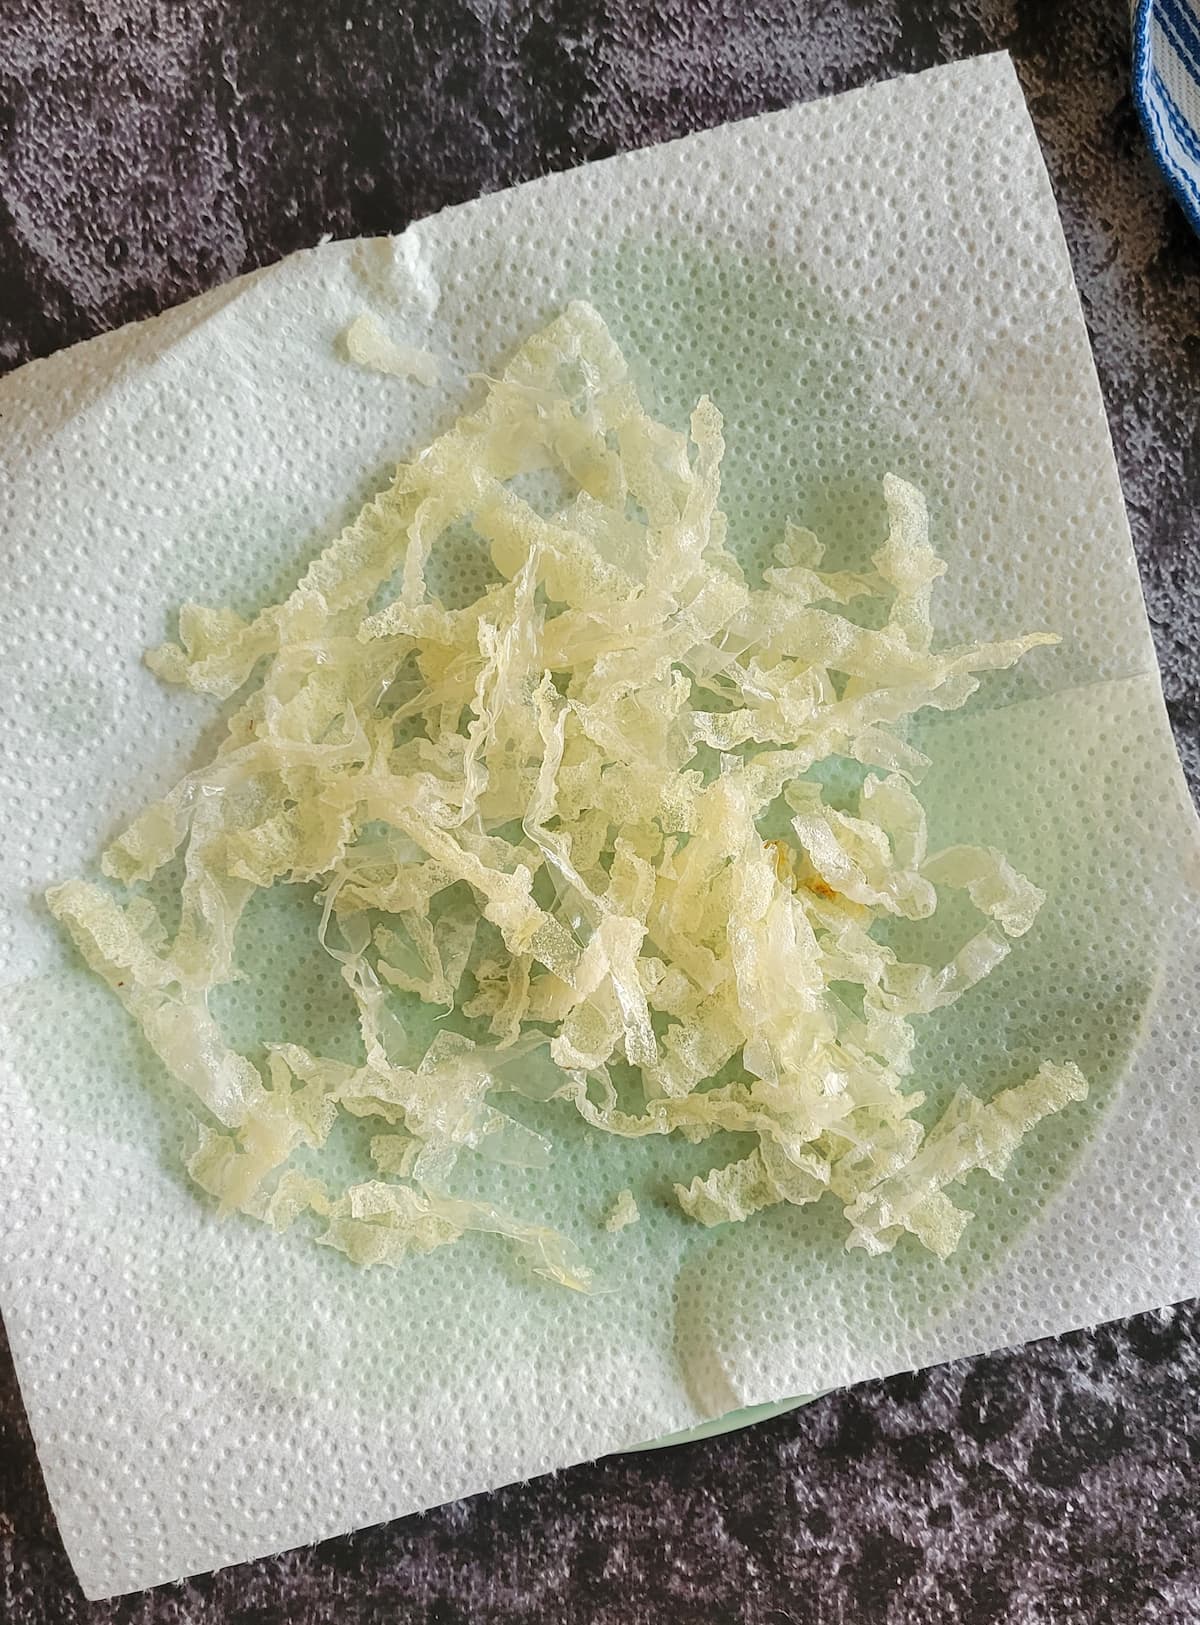 fried rice paper strips on a paper towel lined plate